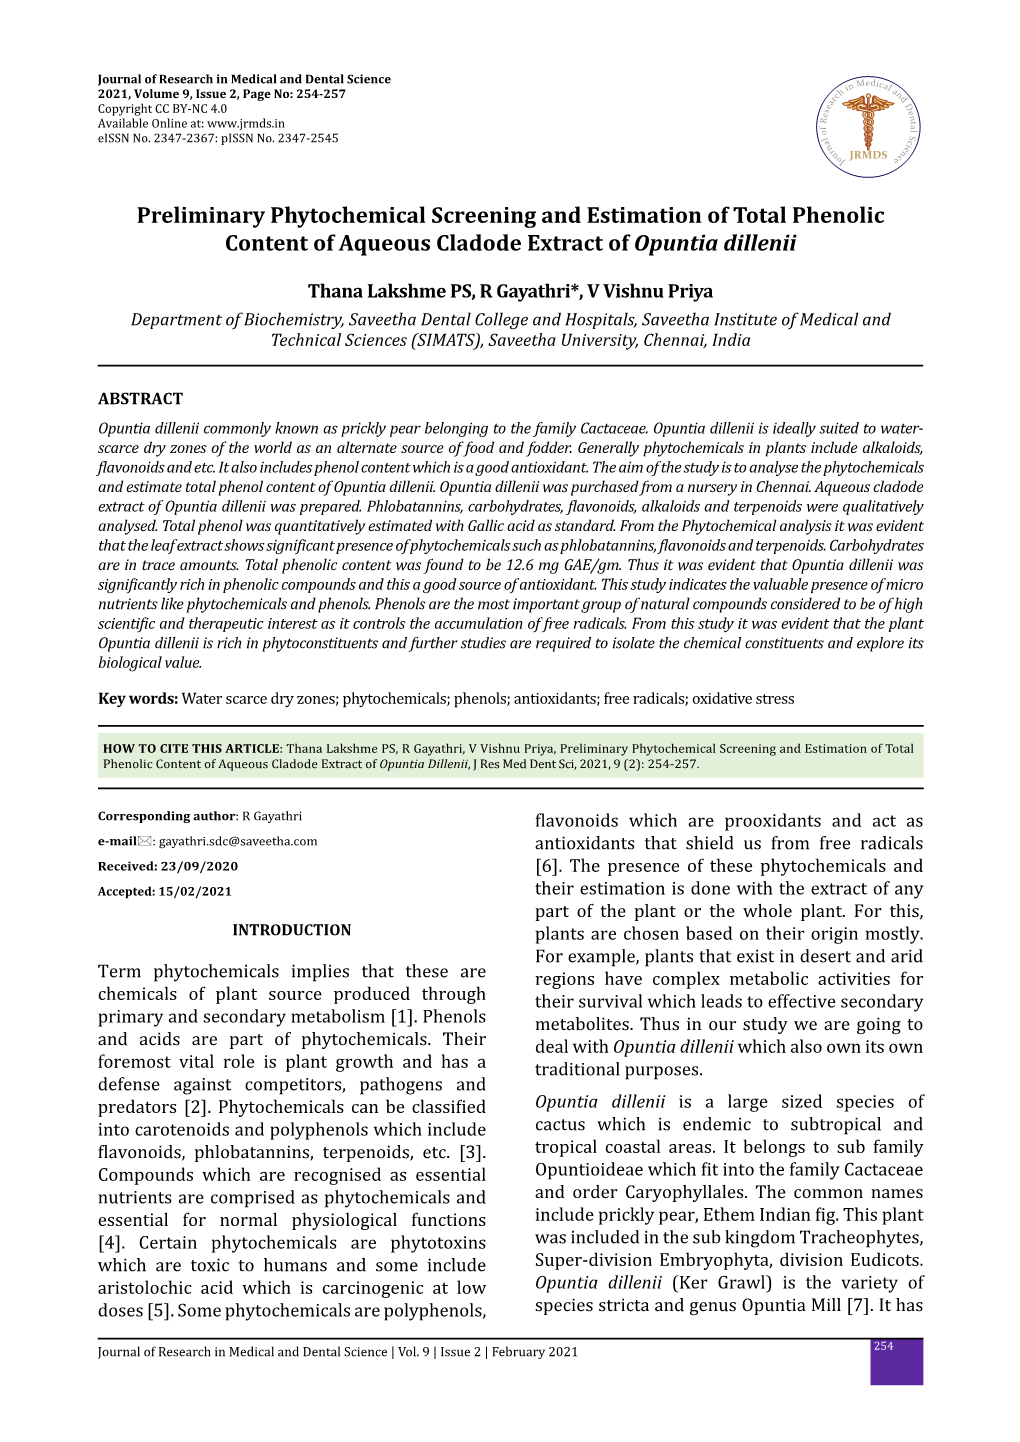 Preliminary Phytochemical Screening and Estimation of Total Phenolic Content of Aqueous Cladode Extract of Opuntia Dillenii